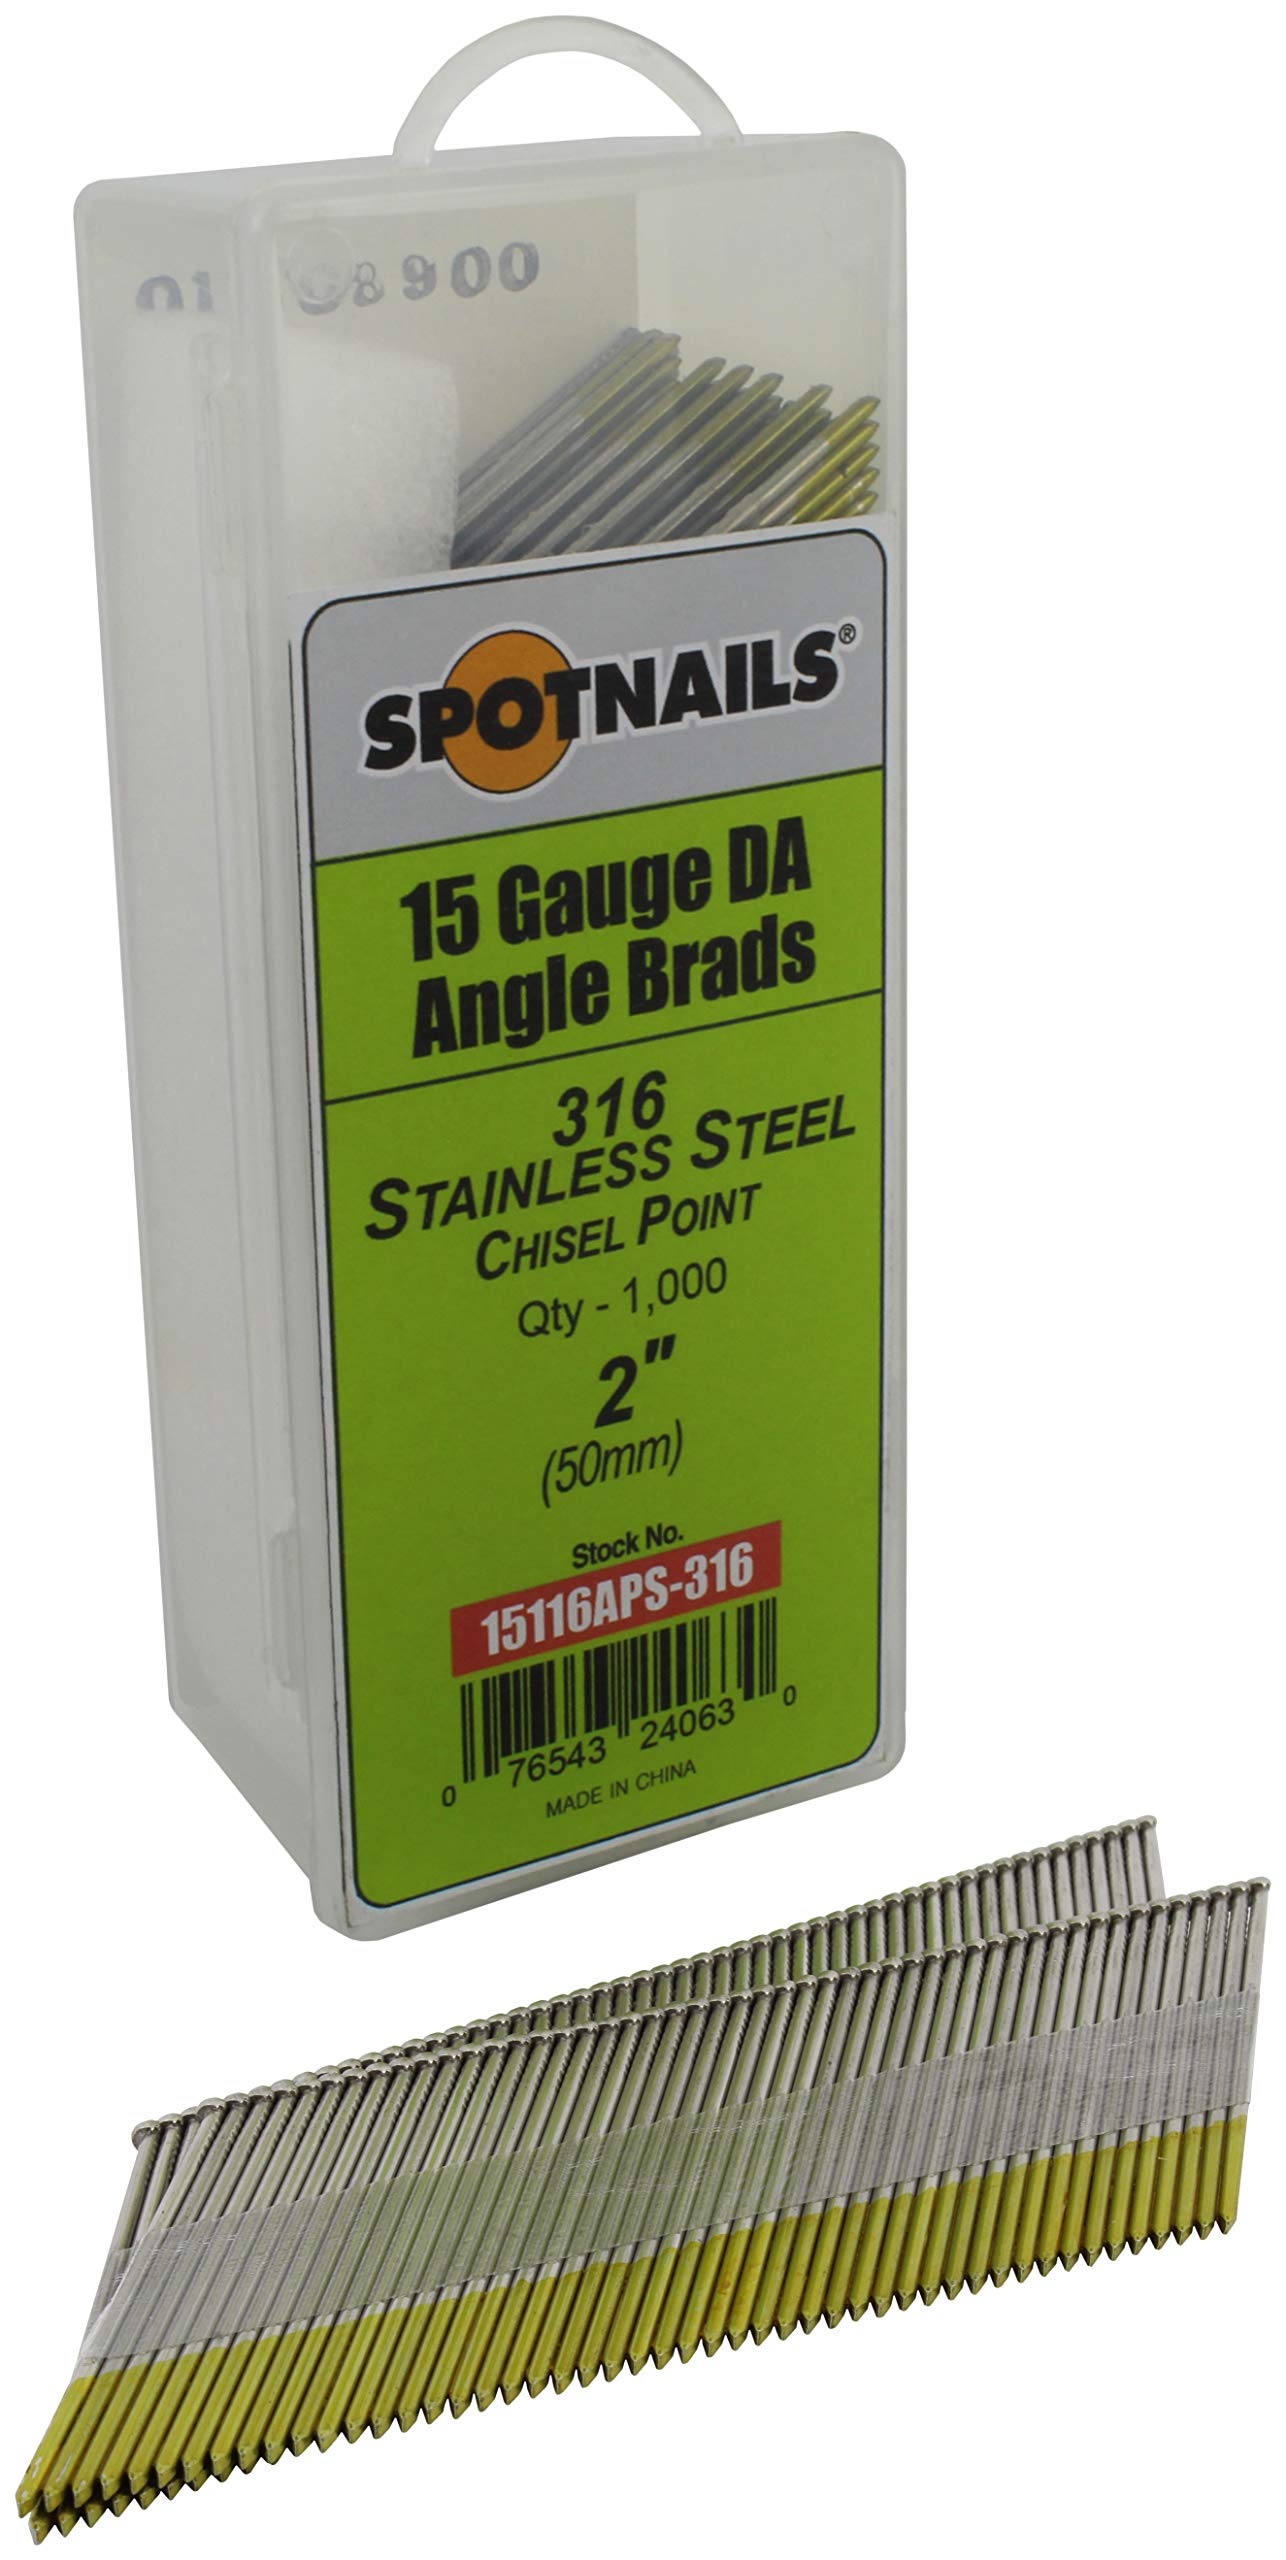 Spotnails 15116APS-316 2 in. 316 Stainless Steel 15 Gauge DA Angle Brads, 1,000/Box